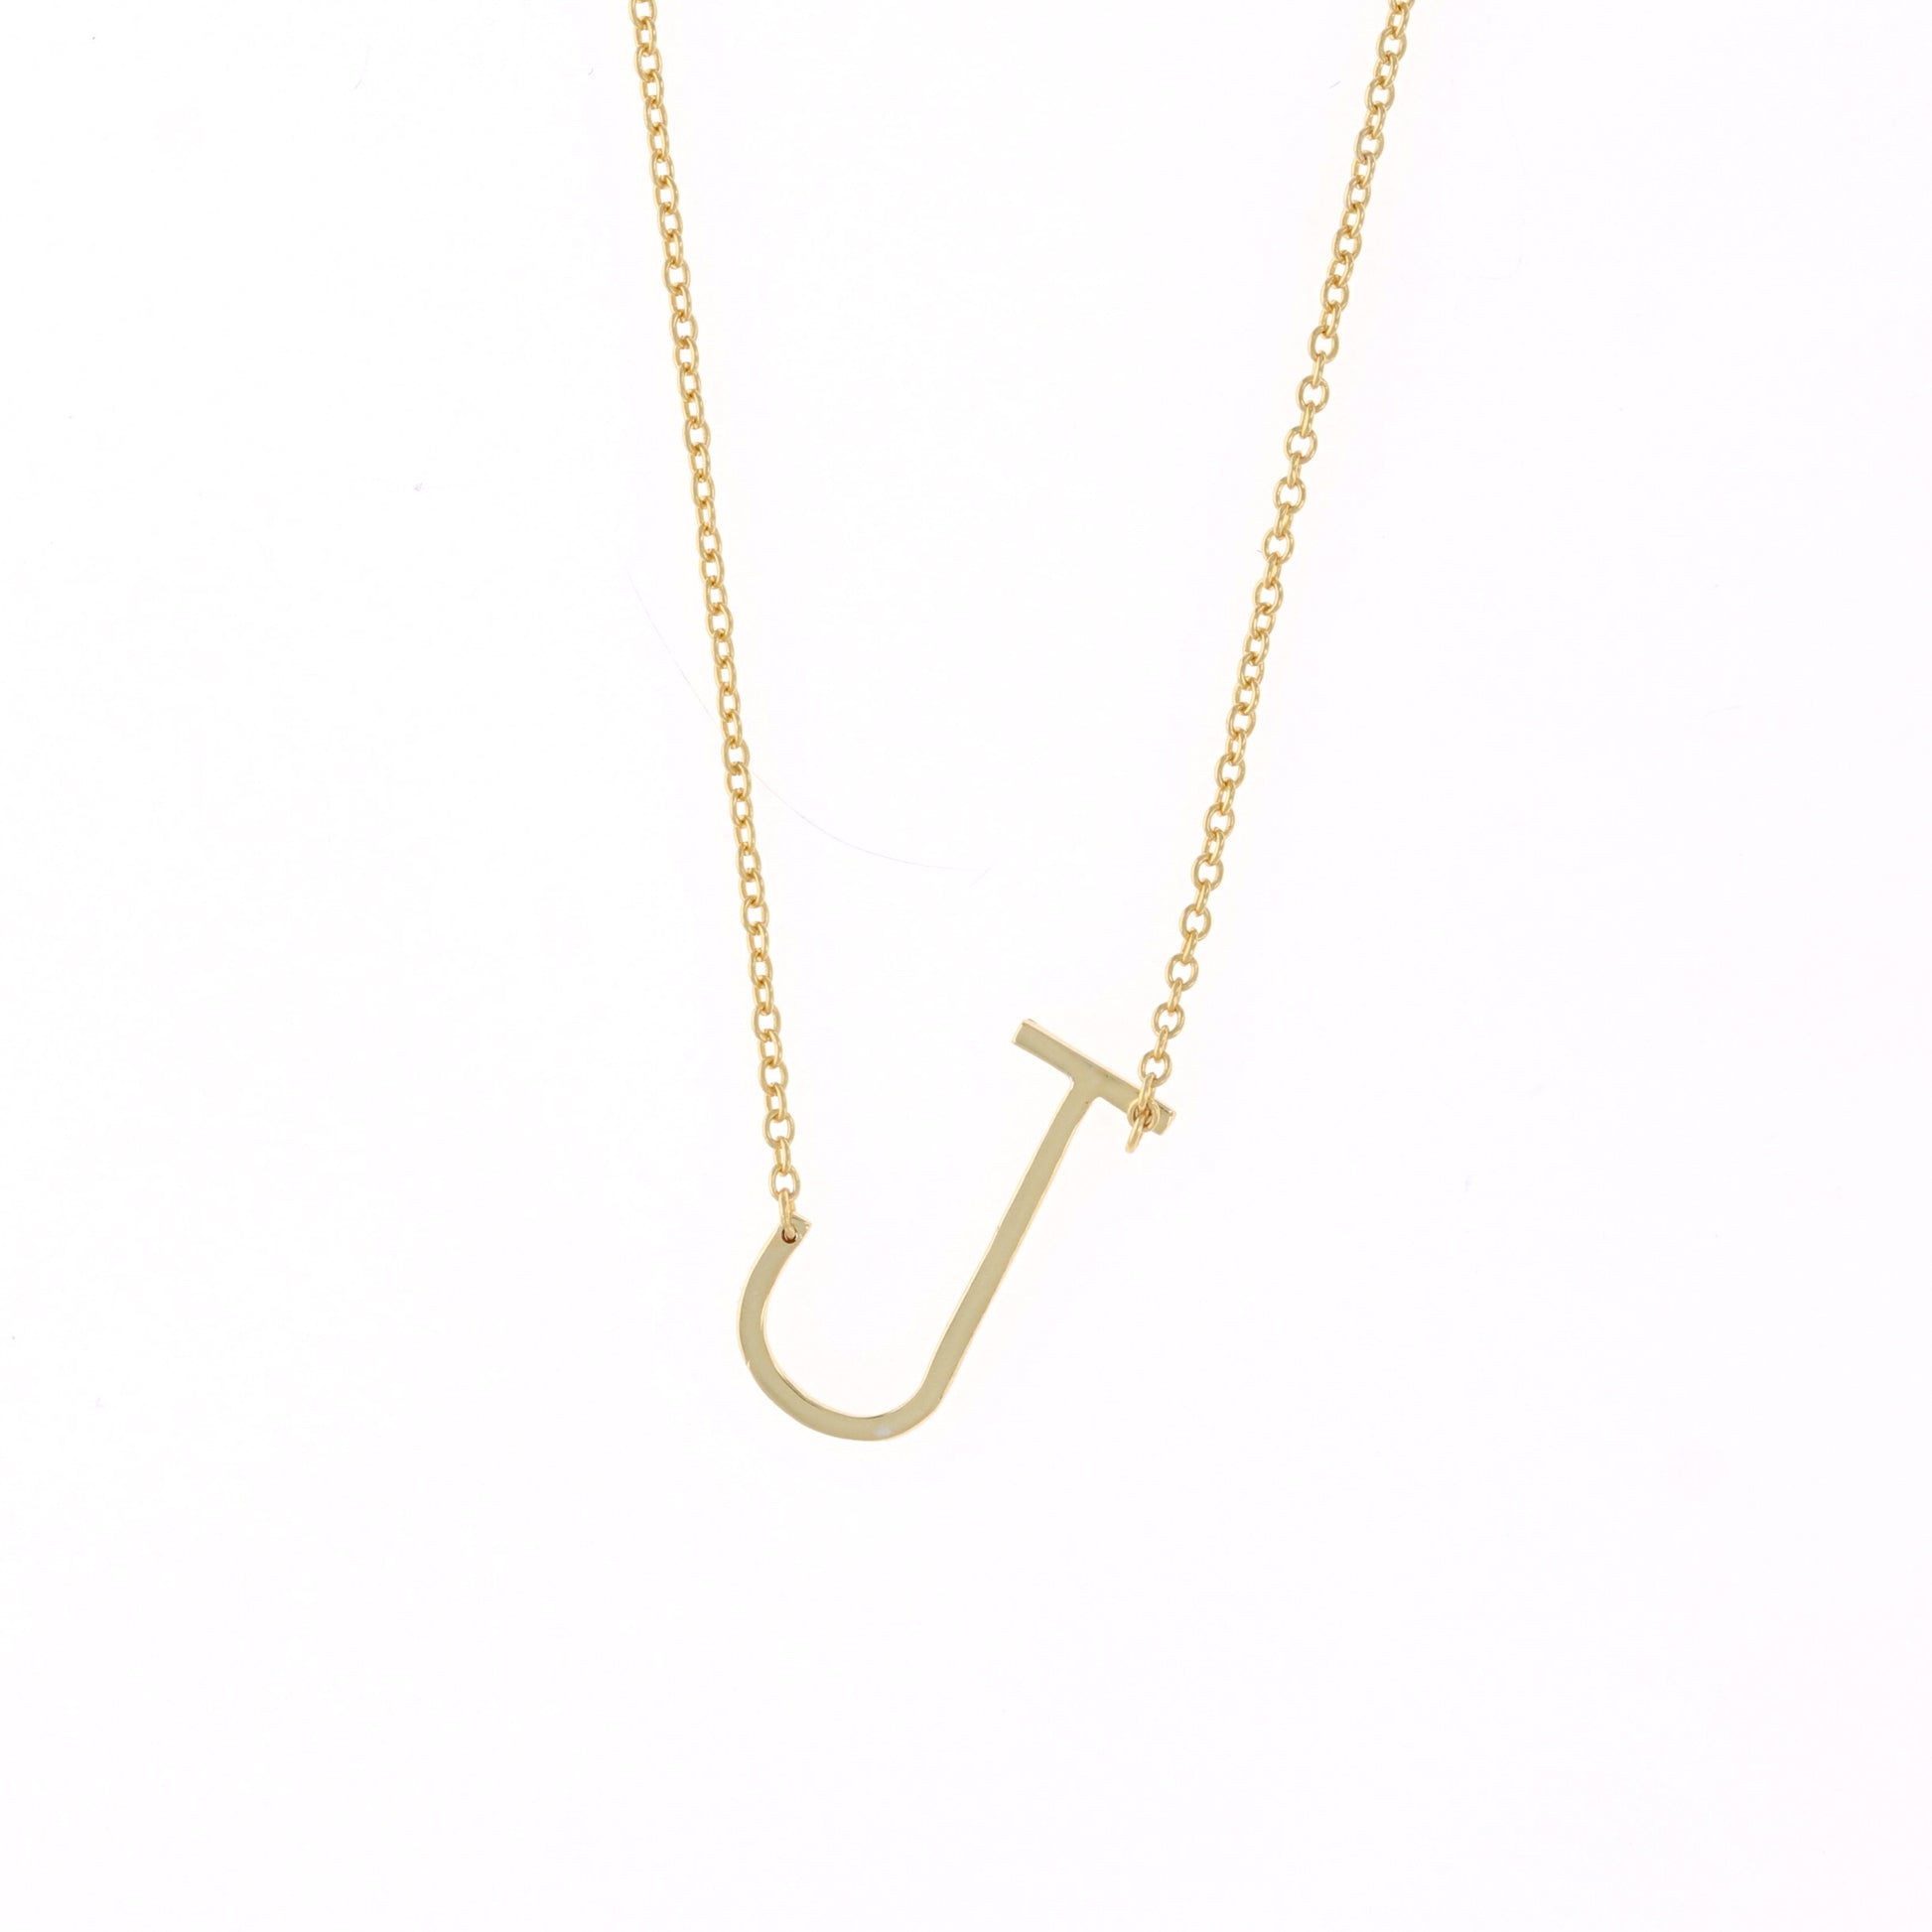 Gold letter J initial necklace, 18"